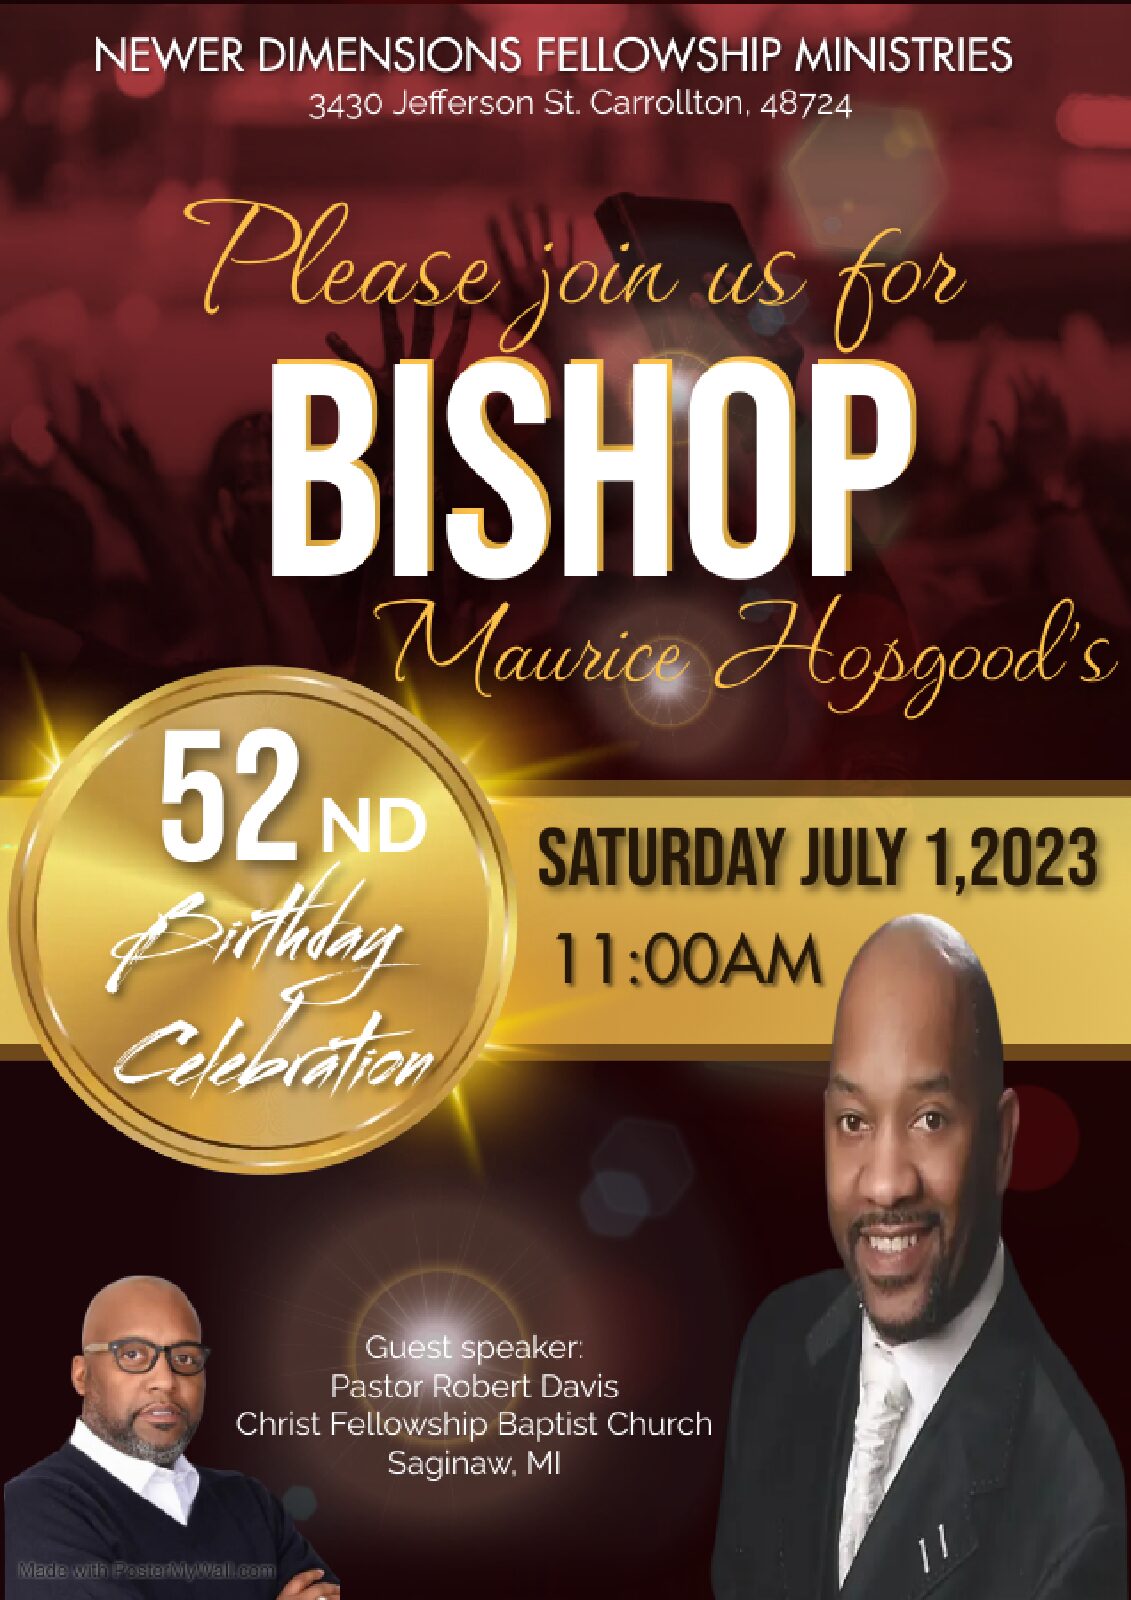 <h1 class="tribe-events-single-event-title">New Dimensions Fellowship Ministries presents Bishop Maurice Hopgood’s 52nd Birthday Celebration</h1>